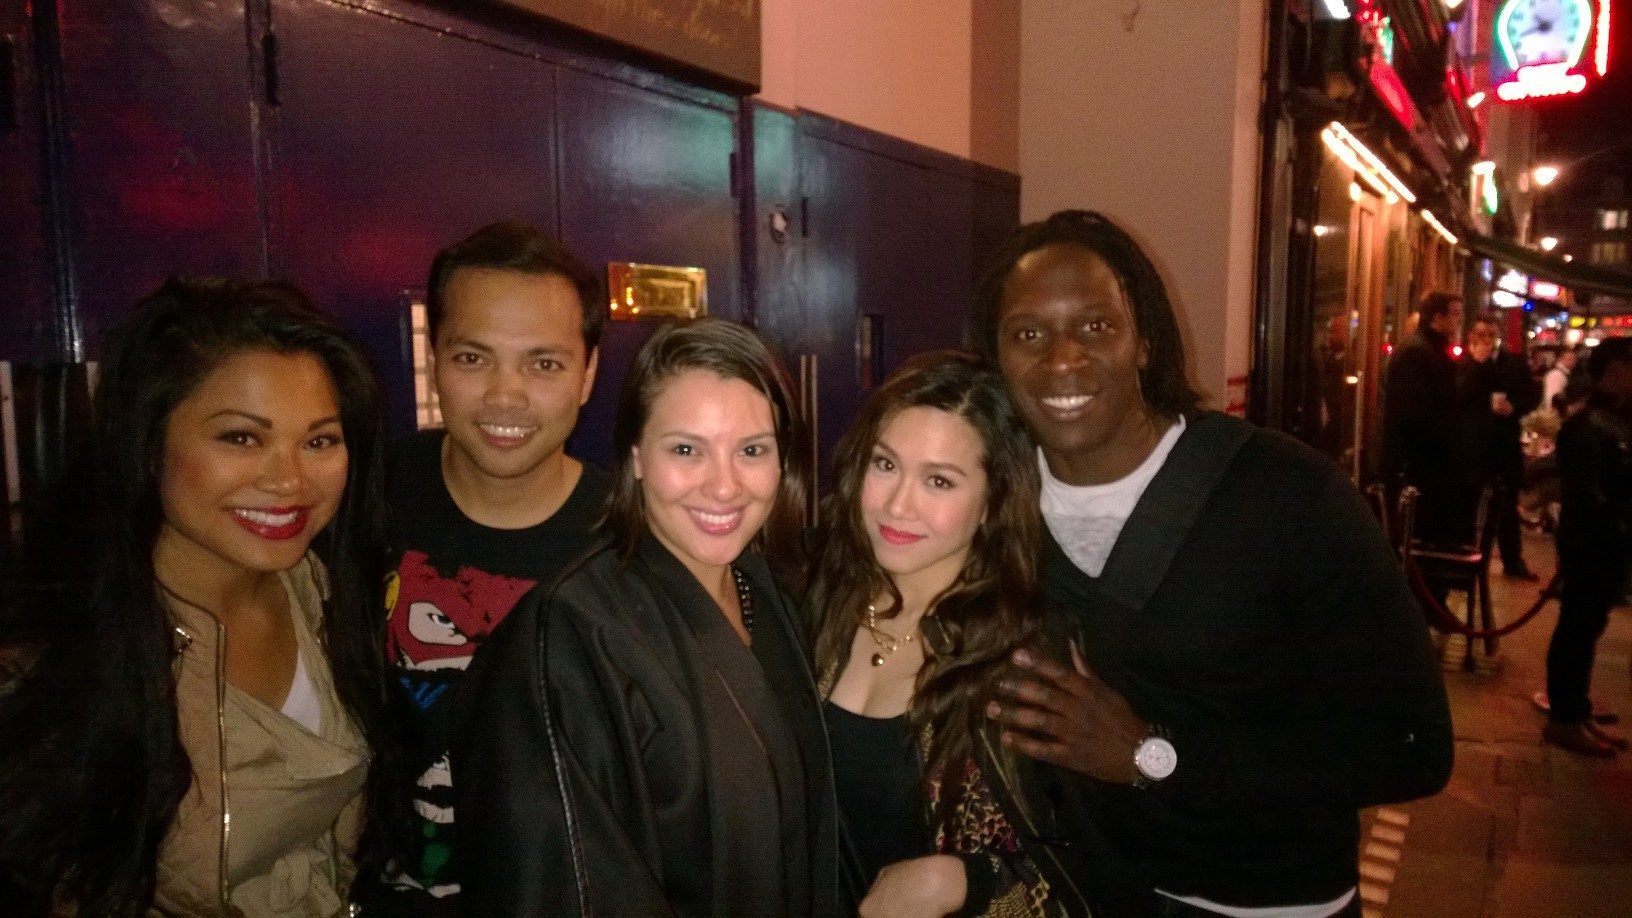 AFTER THE SHOW. With Marsha Songcome, Ariel Reonal, Rachelle Ann Go and Hugh Maynard by the stage door